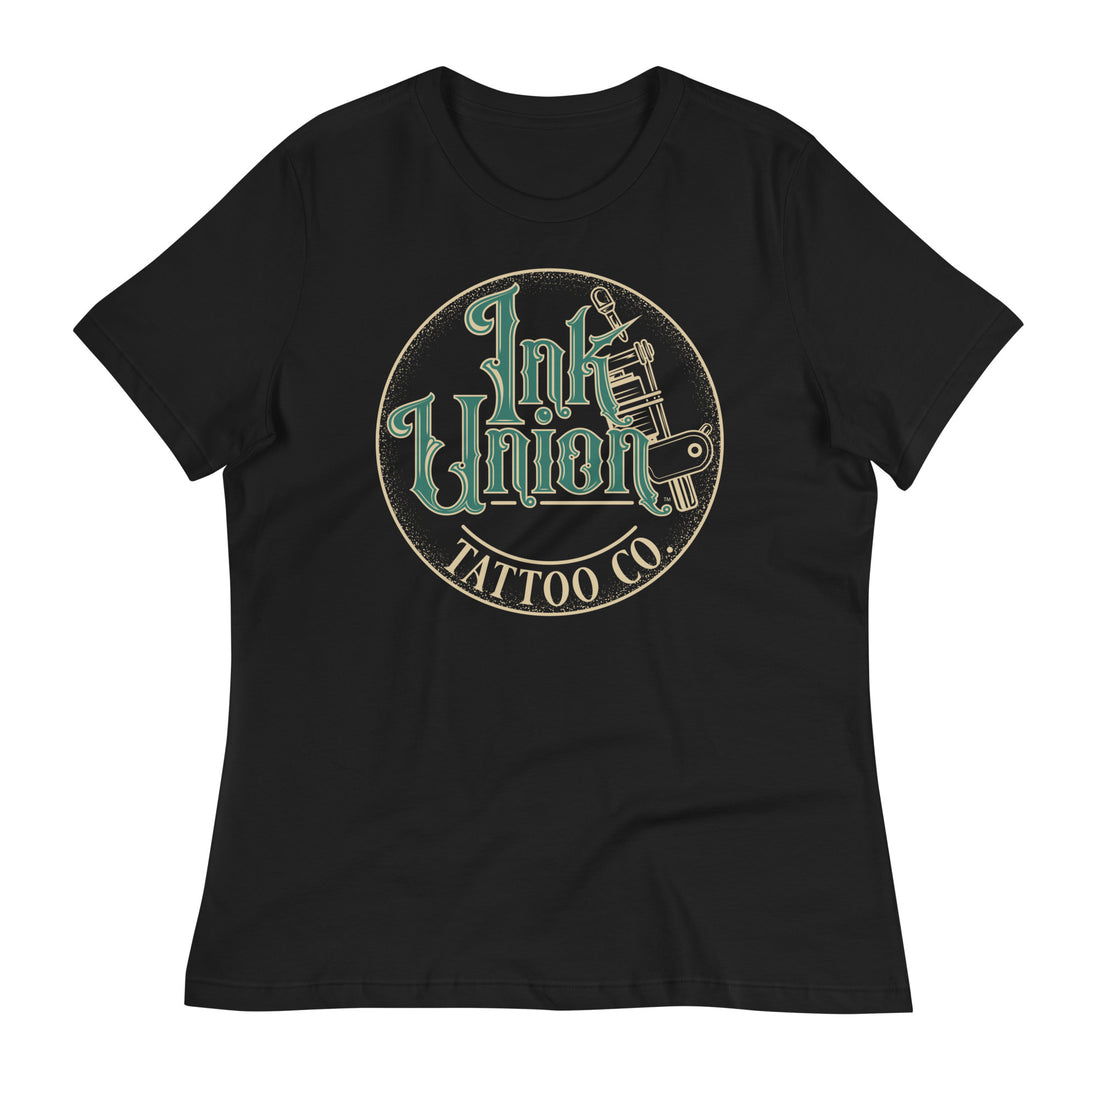 A black t-shirt with a gold circle containing fancy lettering in green and gold that says Ink Union and a gold tattoo machine peeking out from behind on the right side.  There is a dot work gradient inside the circle, and the words Tattoo Co. in gold are at the bottom of the design.